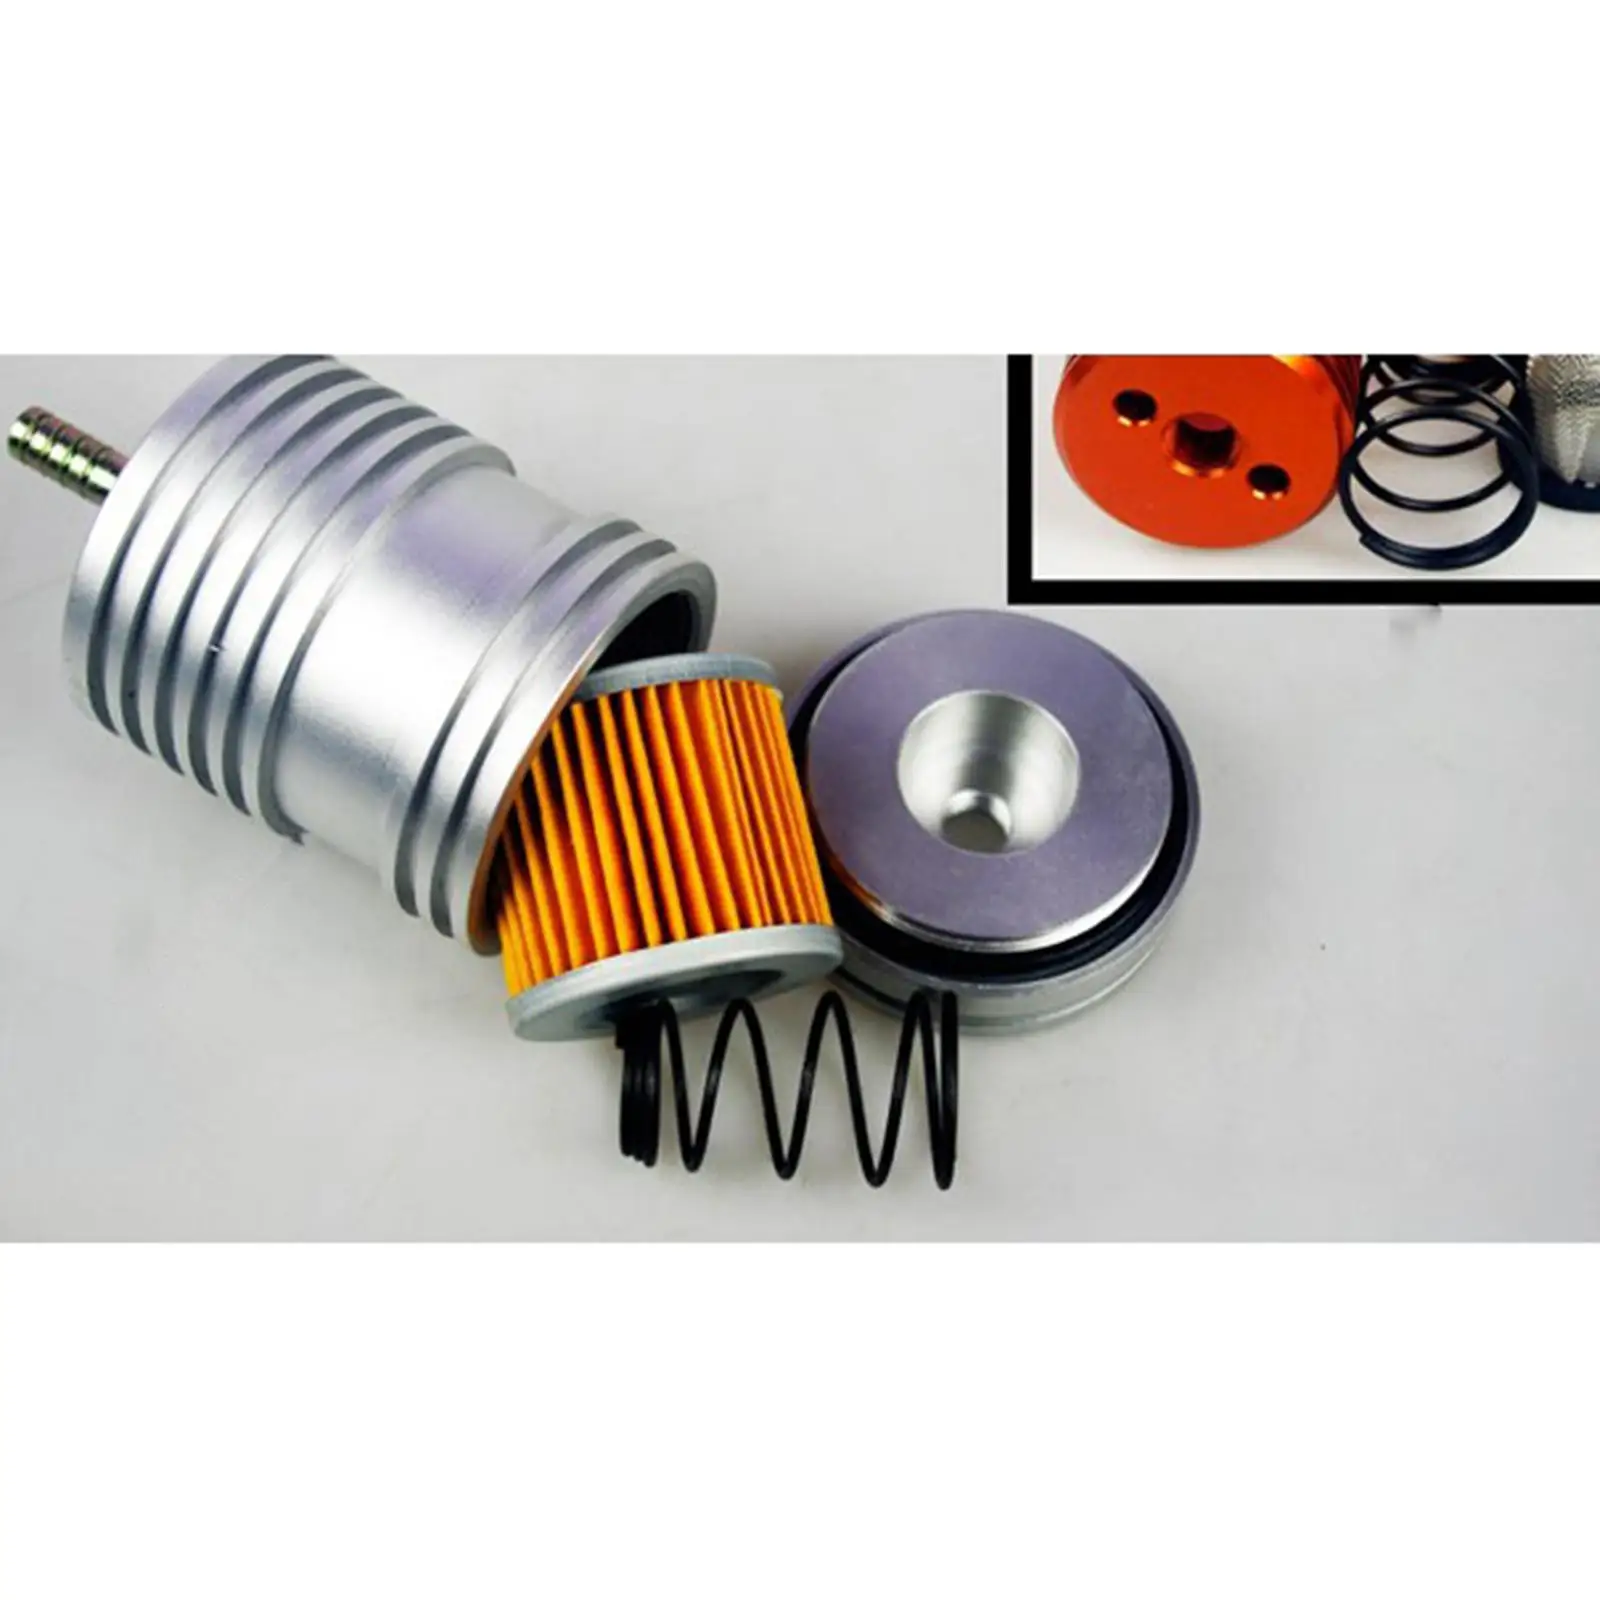 Motorcycle External Oil Cooling System Filter Replacements 5.9x3.1